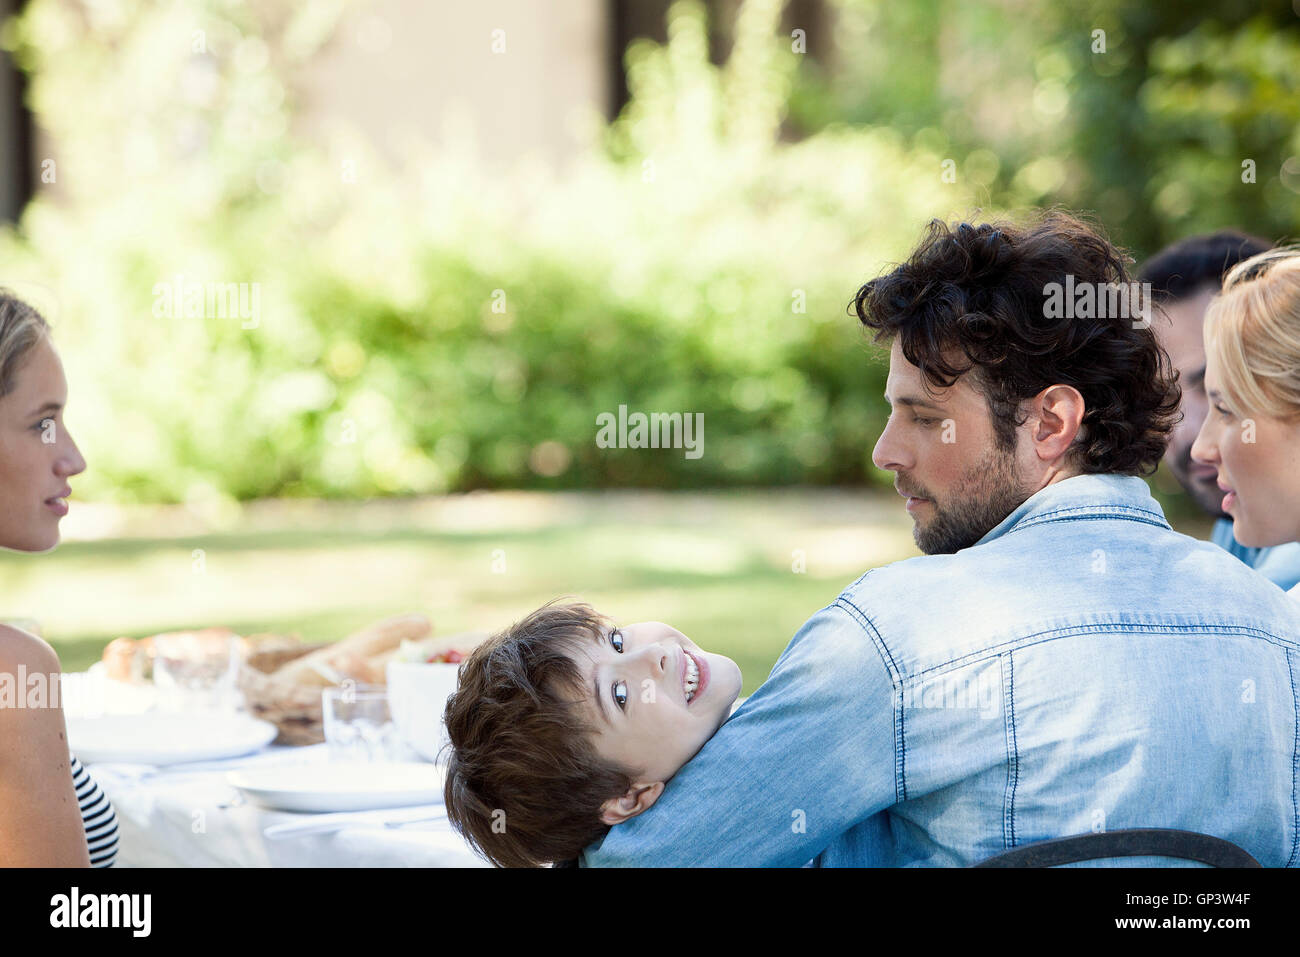 Family together at outdoor table, boy smiling over his shoulder Stock Photo